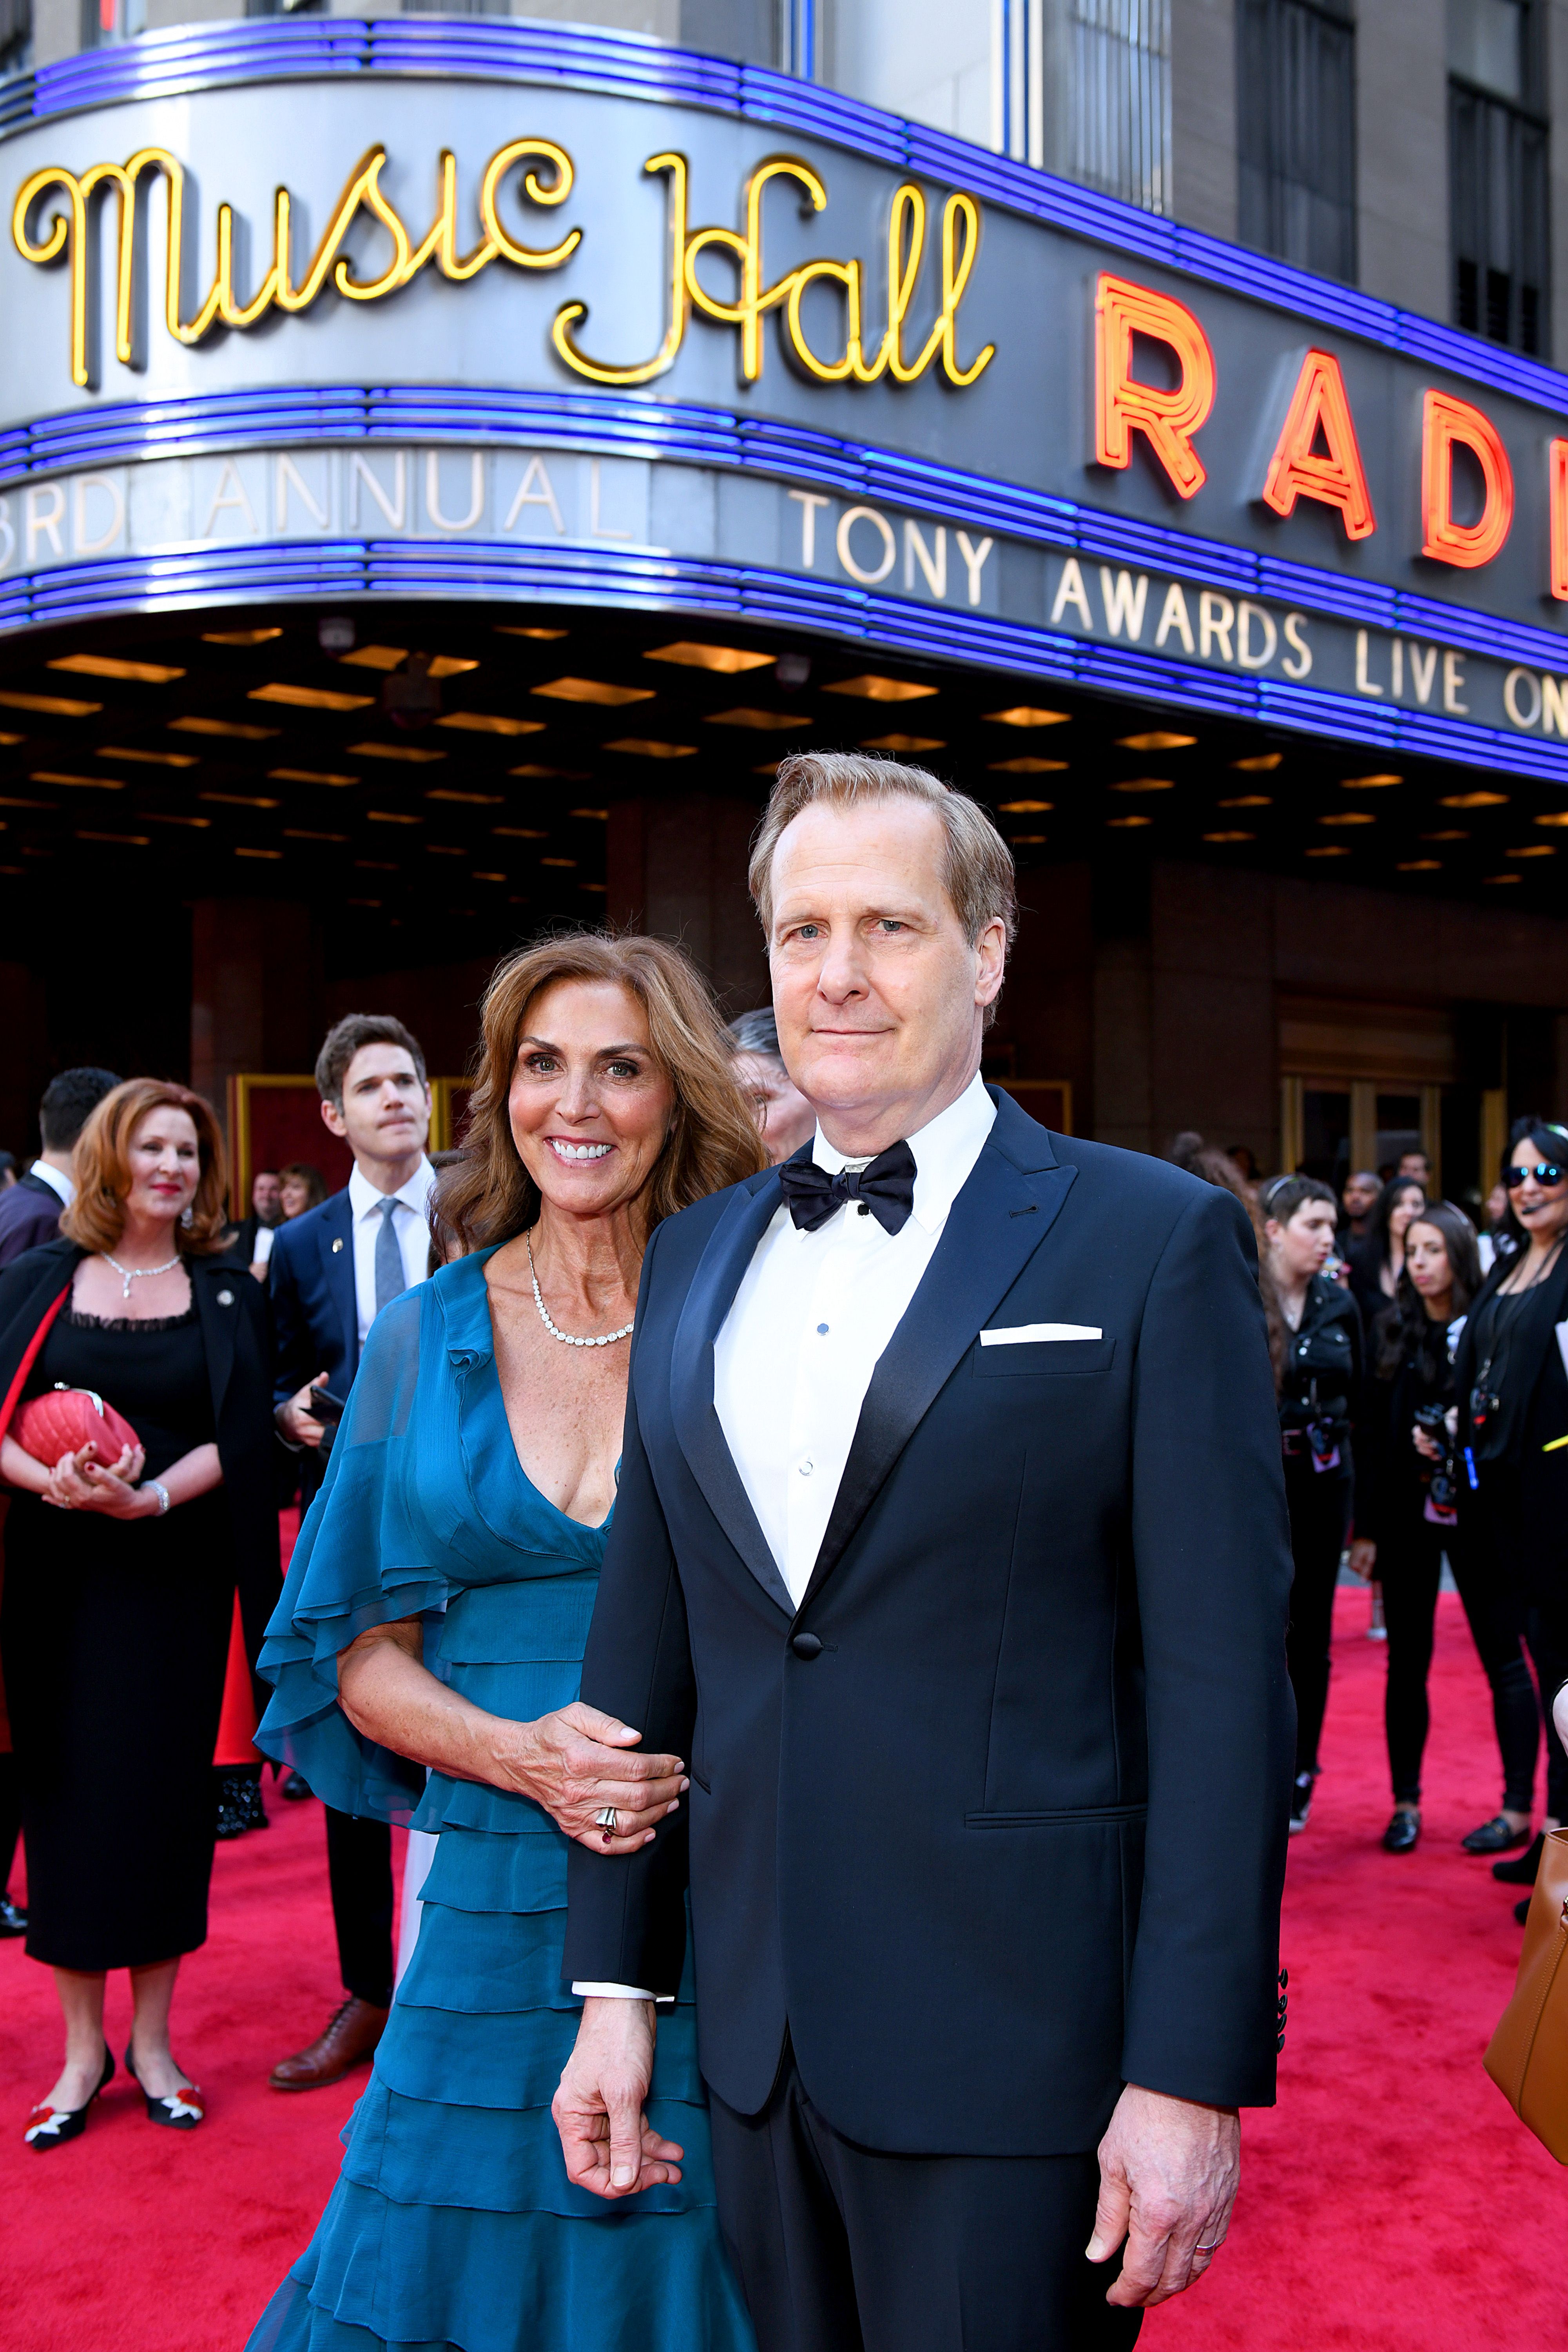 Kathleen Rosemary Treado and Jeff Daniels at the 73rd Annual Tony Awards on June 9, 2019, in New York City. | Source: Jenny Anderson/Getty Images